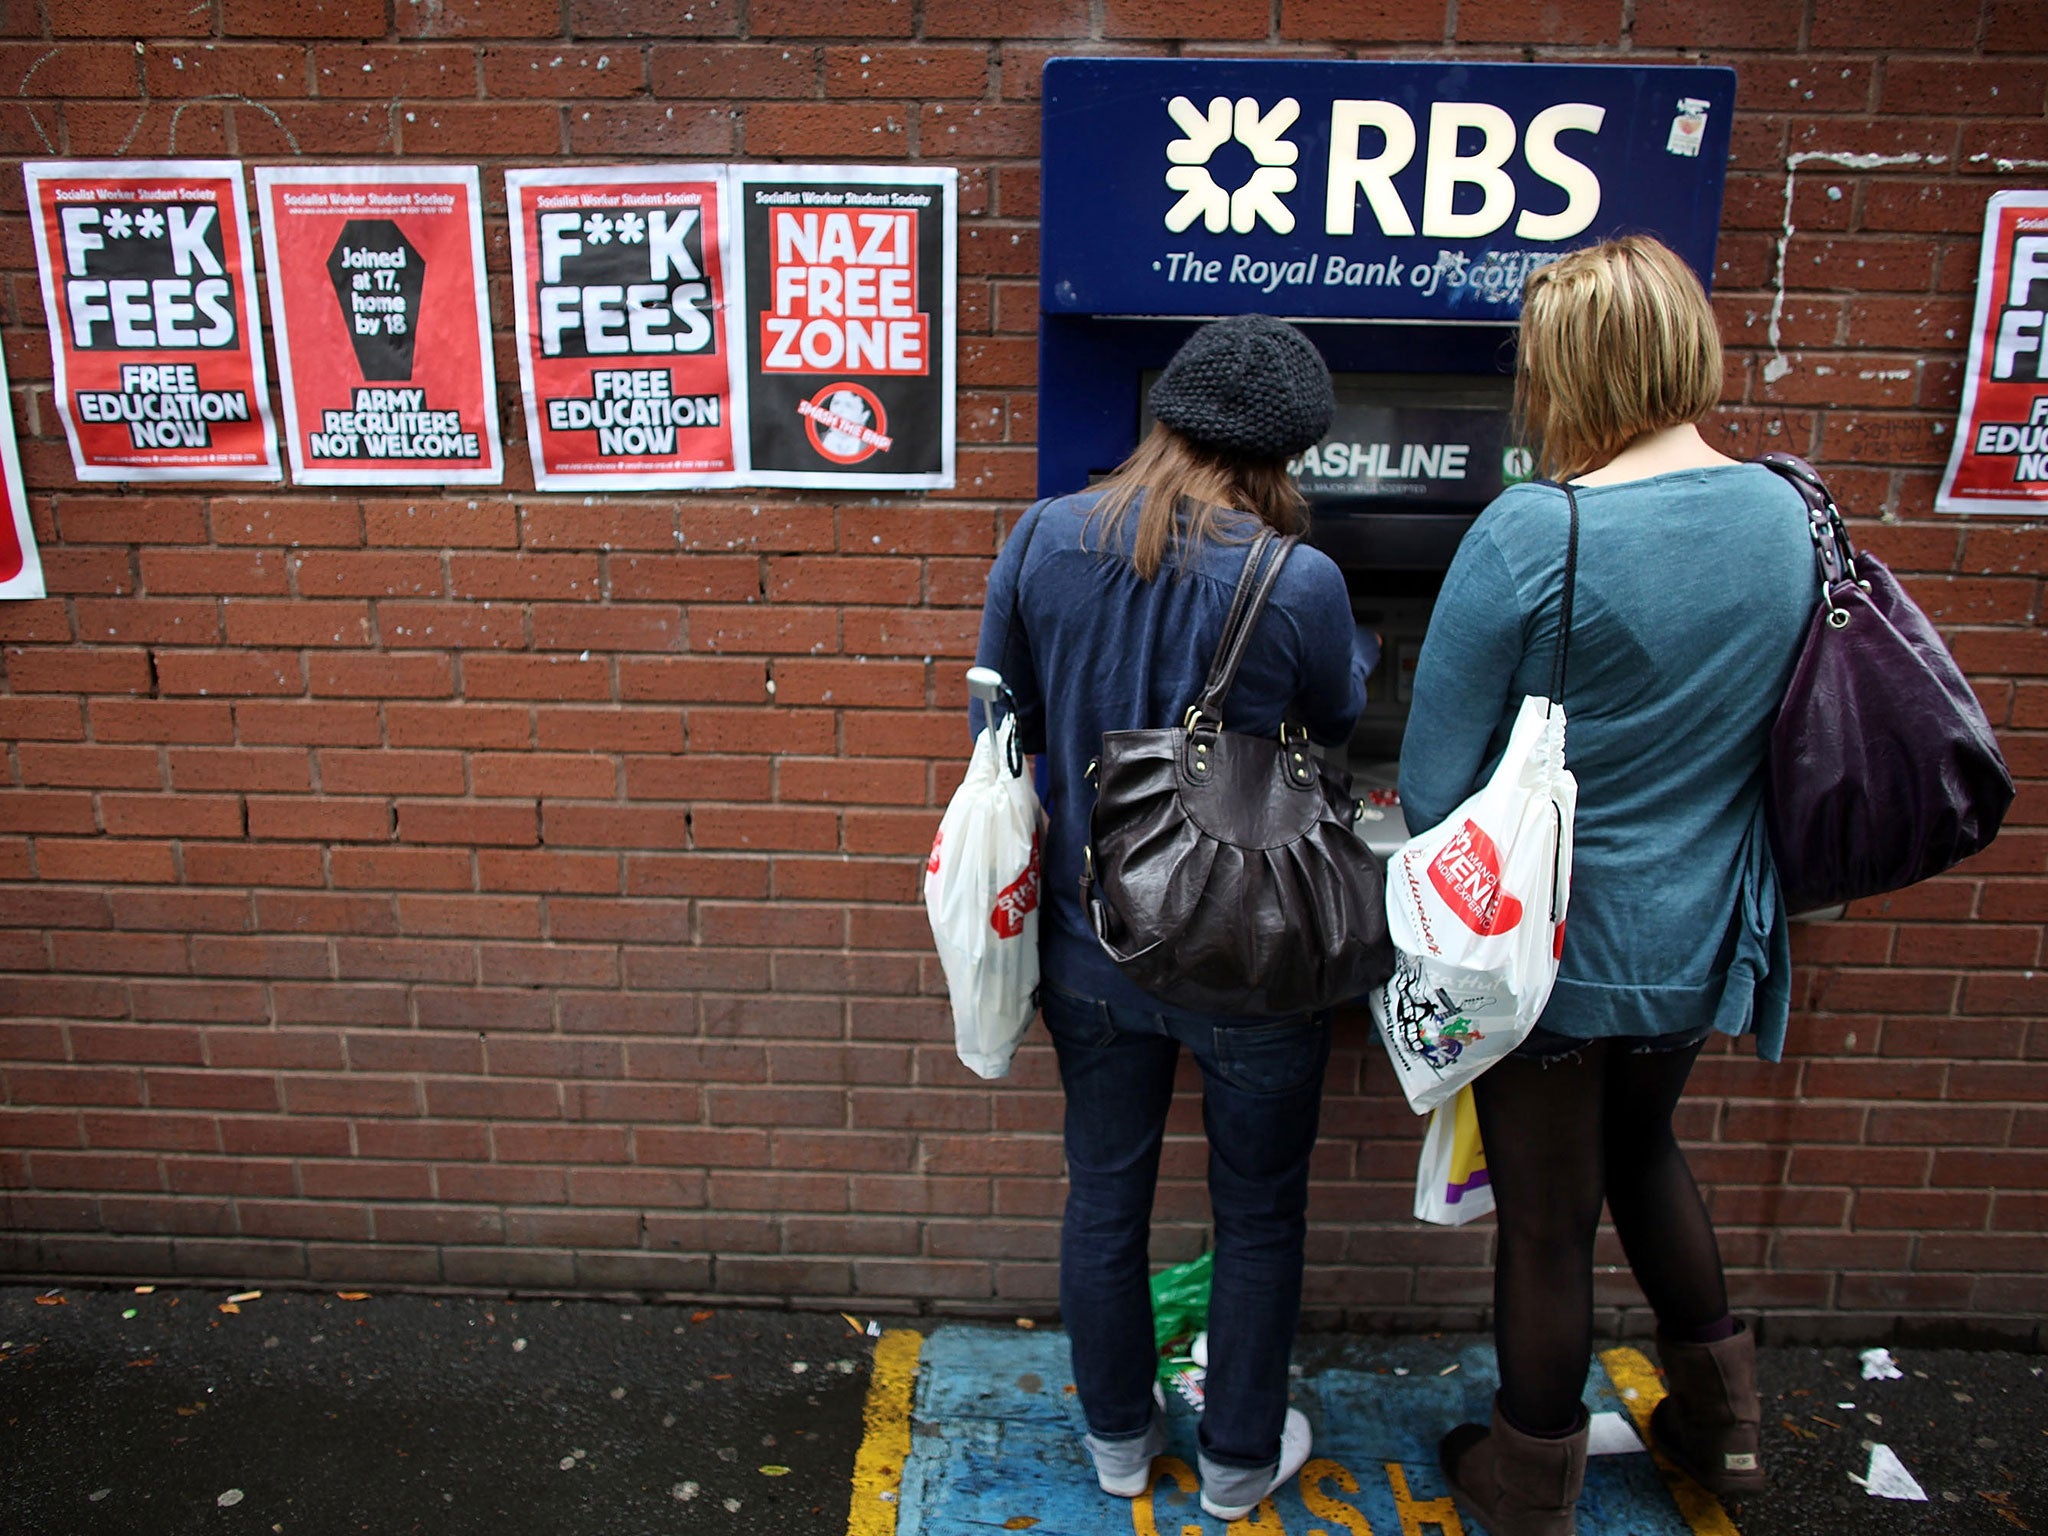 Students arriving for Manchester University's freshers week queue up at a cash machine to draw money in Manchester, England.